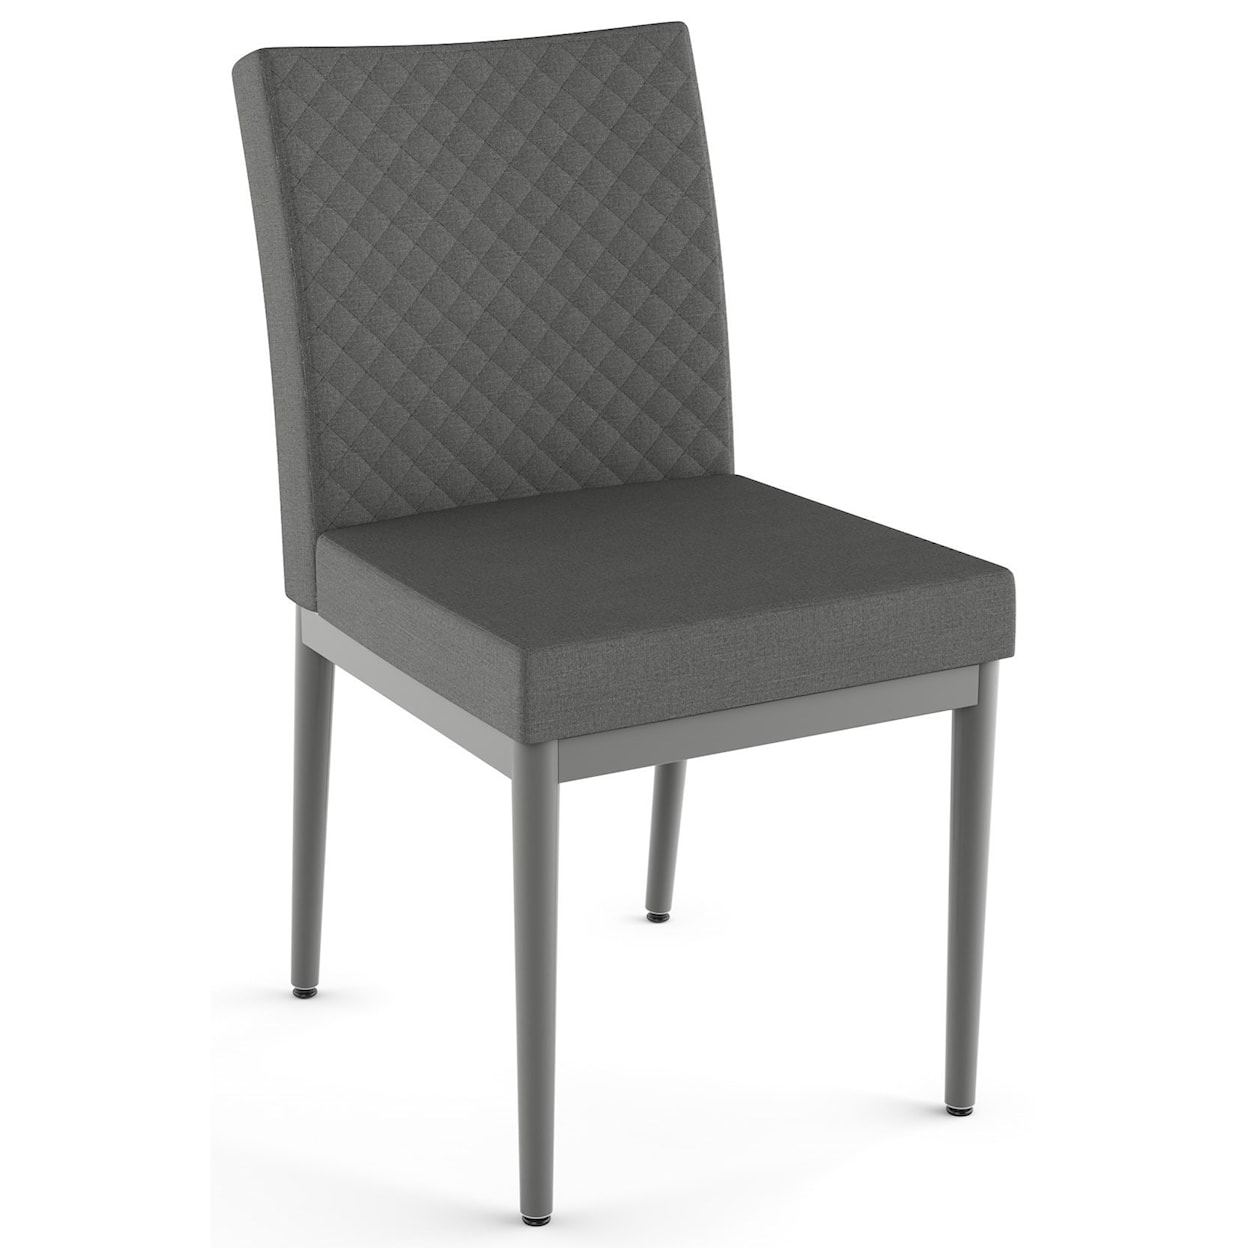 Amisco Urban Melrose Chair with Quilted Fabric